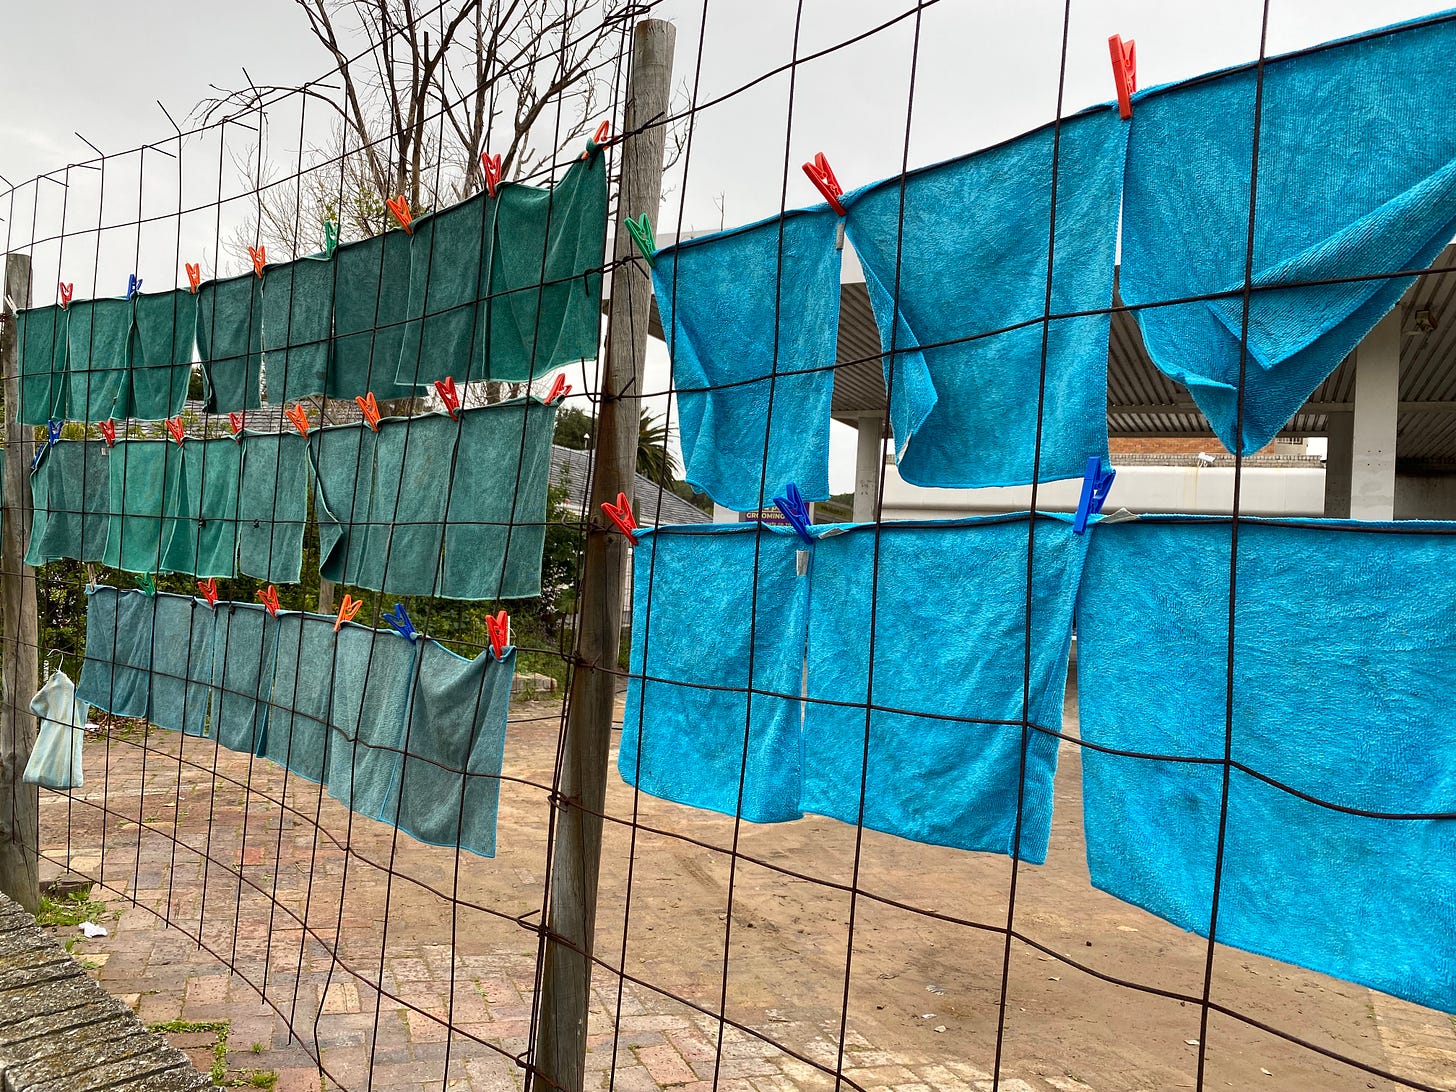 green cloths pegged against a wire fence and turquoise cloths pegged to the right of the green ones